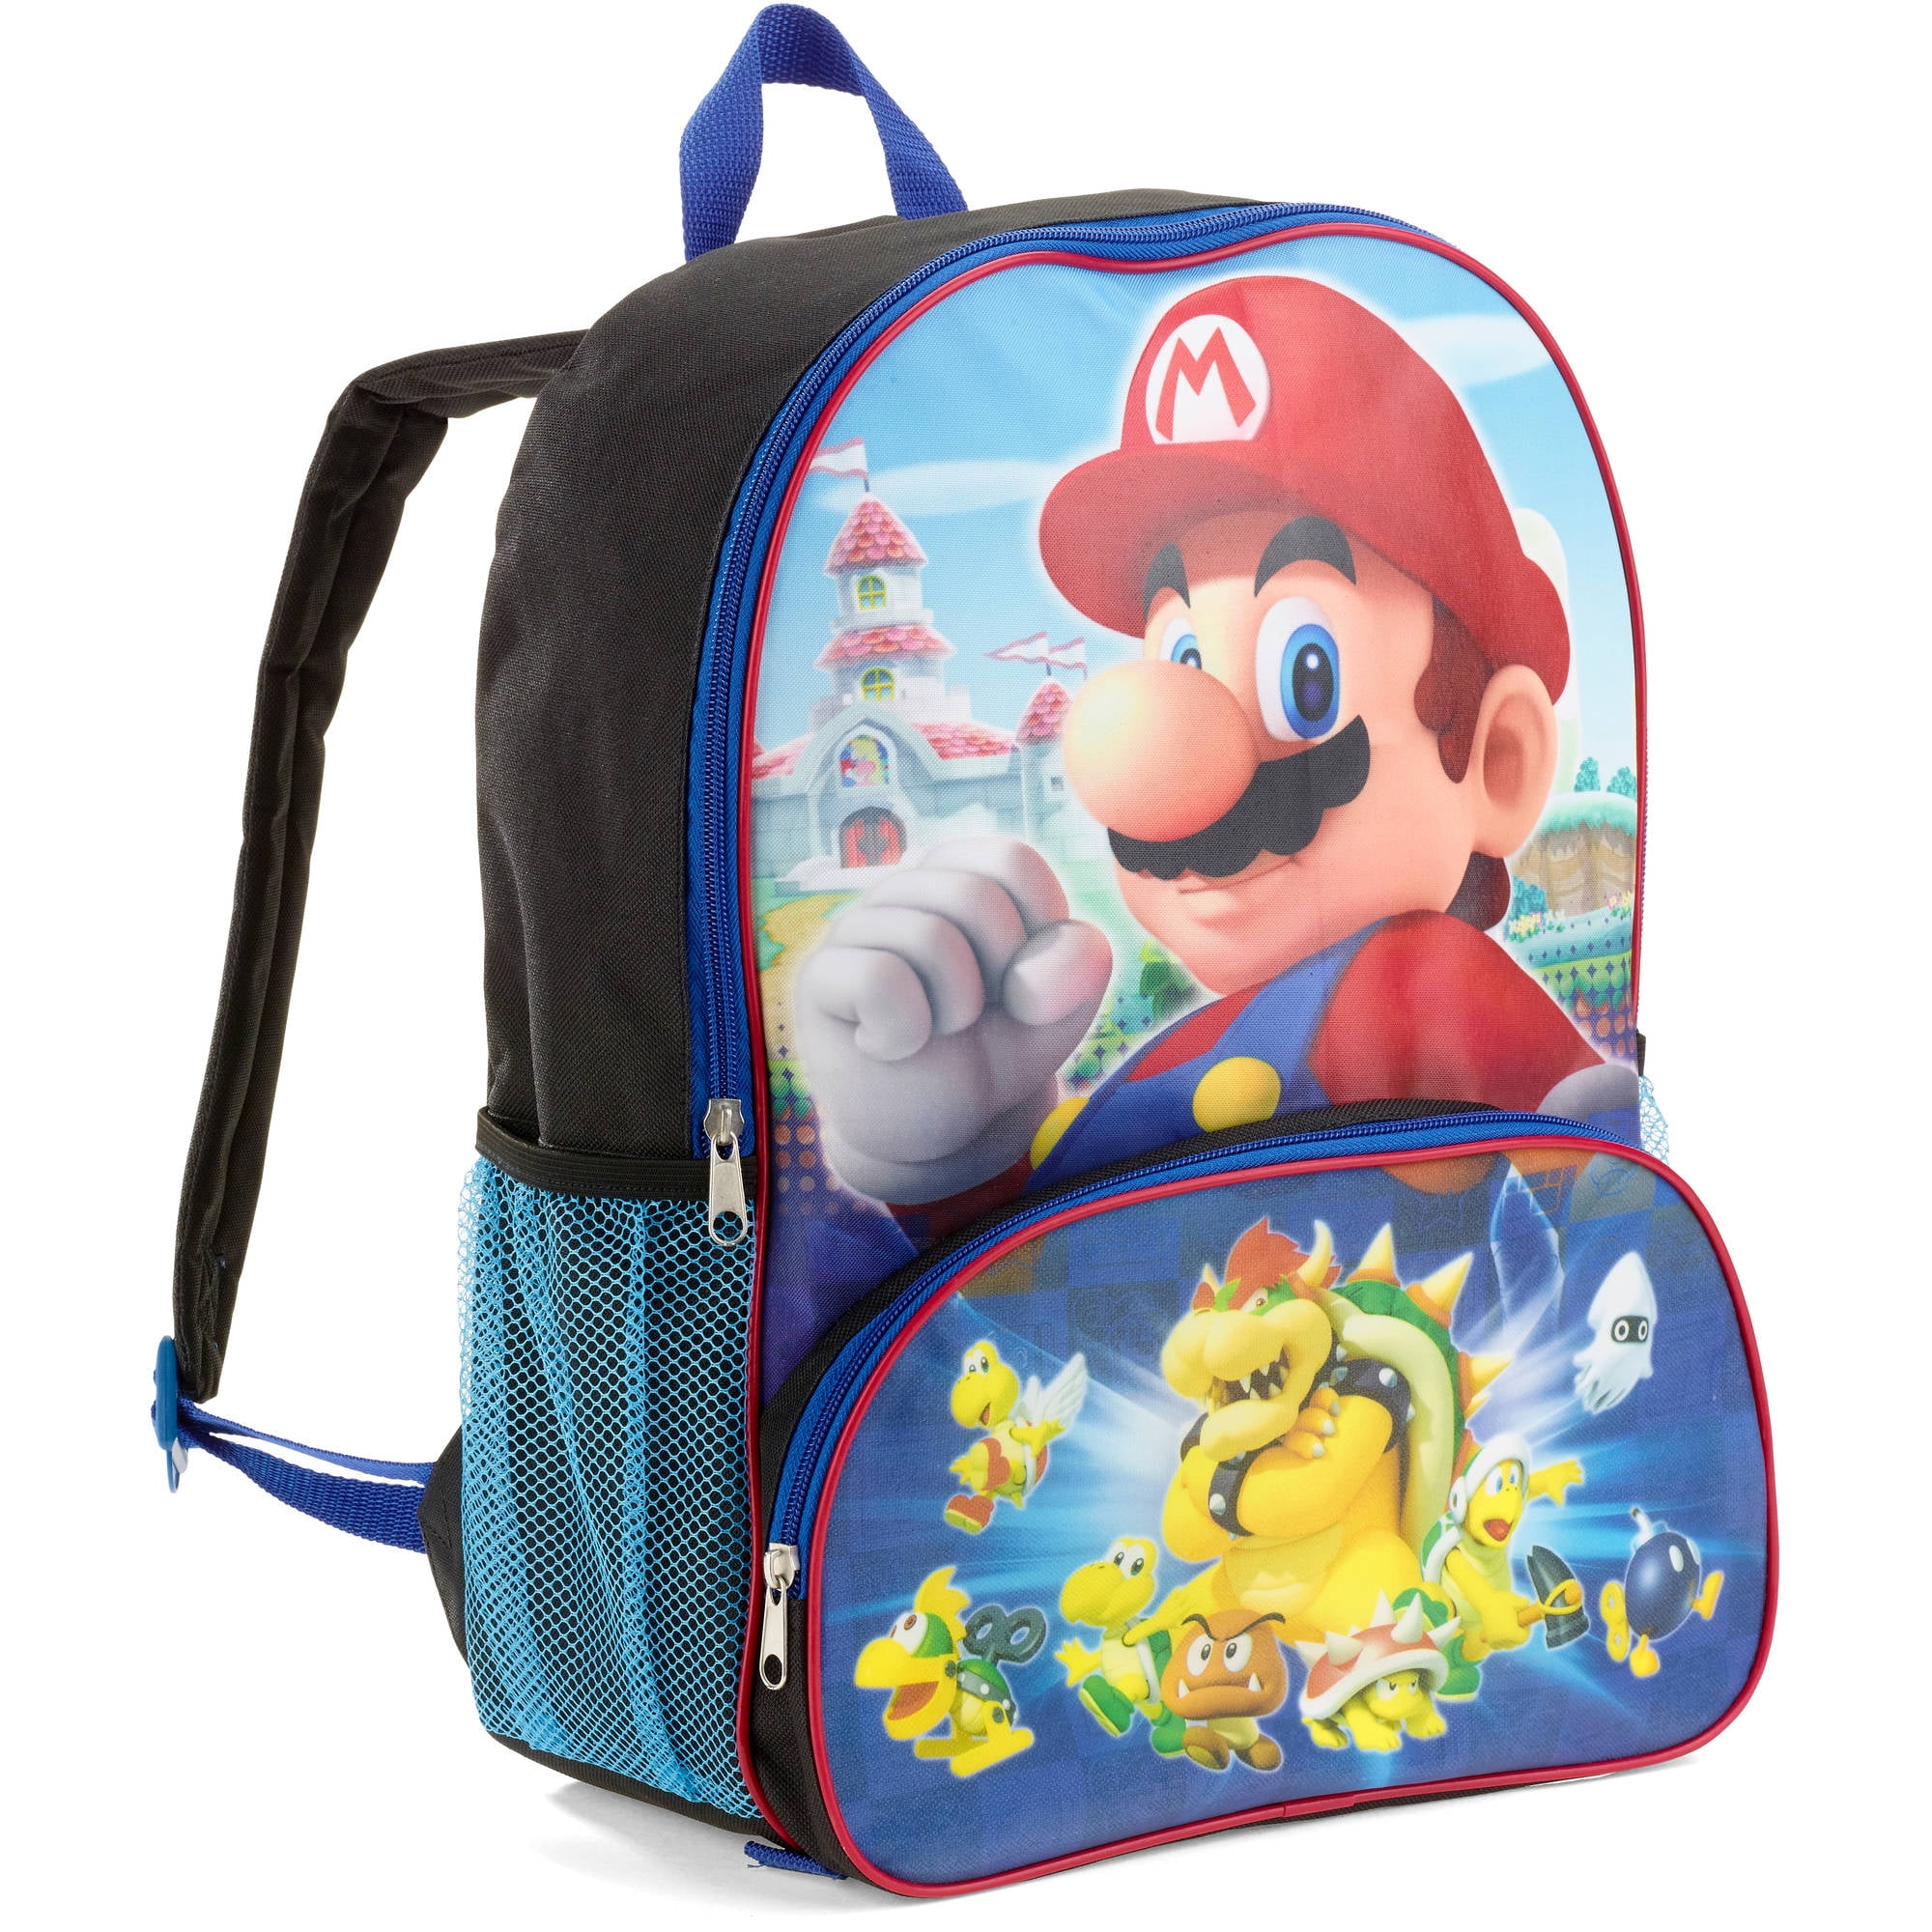 16 Inch Super Mario Backpack Book Bag Travel Everyday bag pouch with Stationary Supplies 